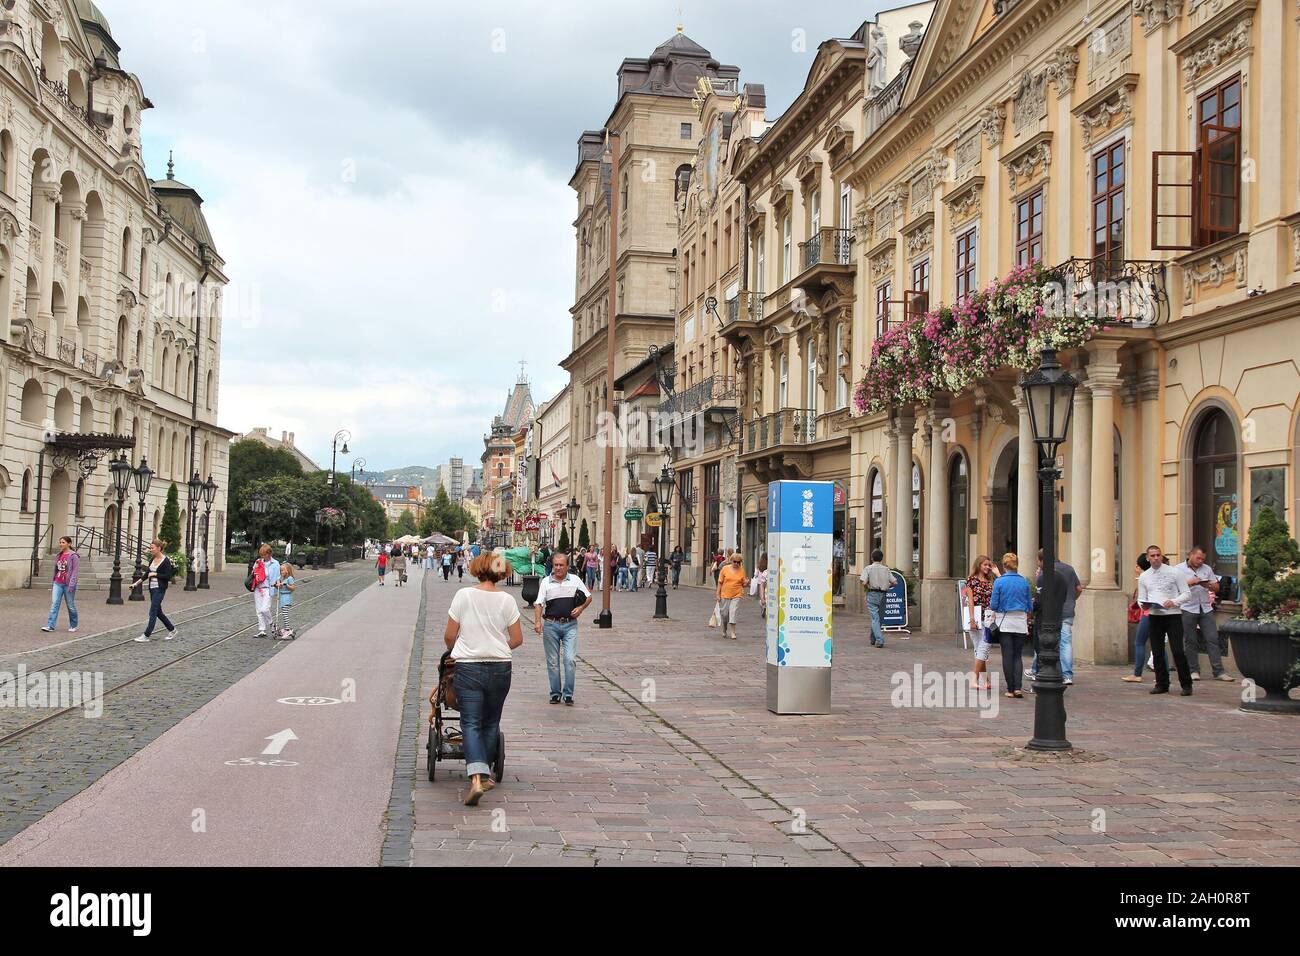 KOSICE, SLOVAKIA - AUGUST 27, 2012: People visit Kosice, Slovakia. Kosice is the 2nd largest city in Slovakia with 555,800 people living in metro area Stock Photo